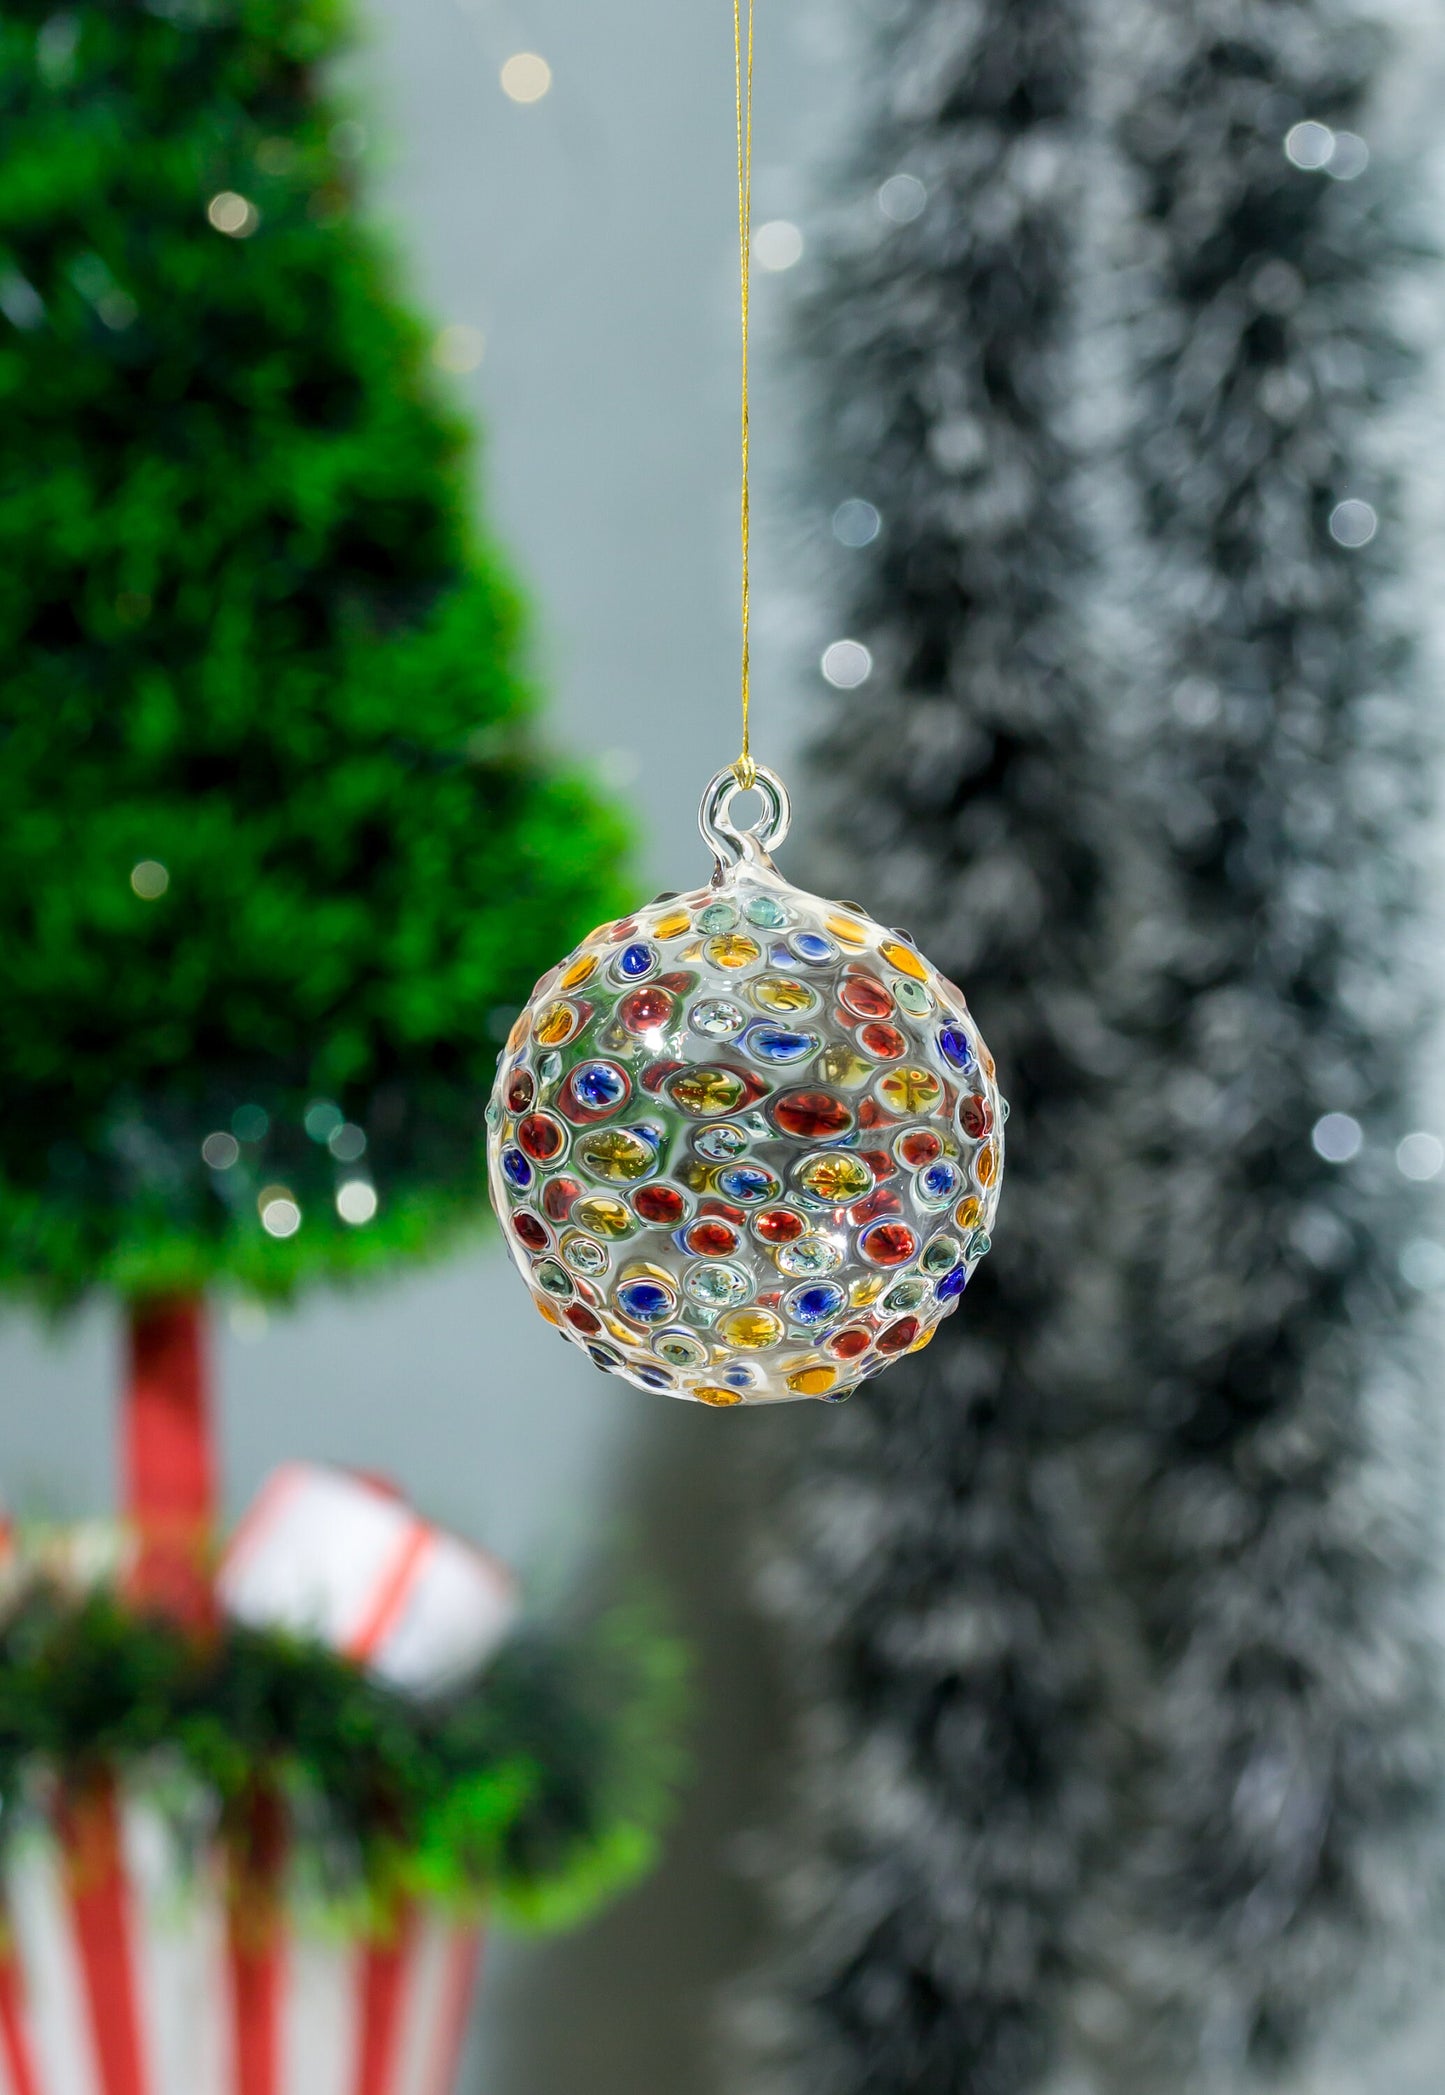 Multicolored Tree topper Glass ornament for christmas decorations | hanging ball ornaments for xmas holidays | handblown Christmas ornaments